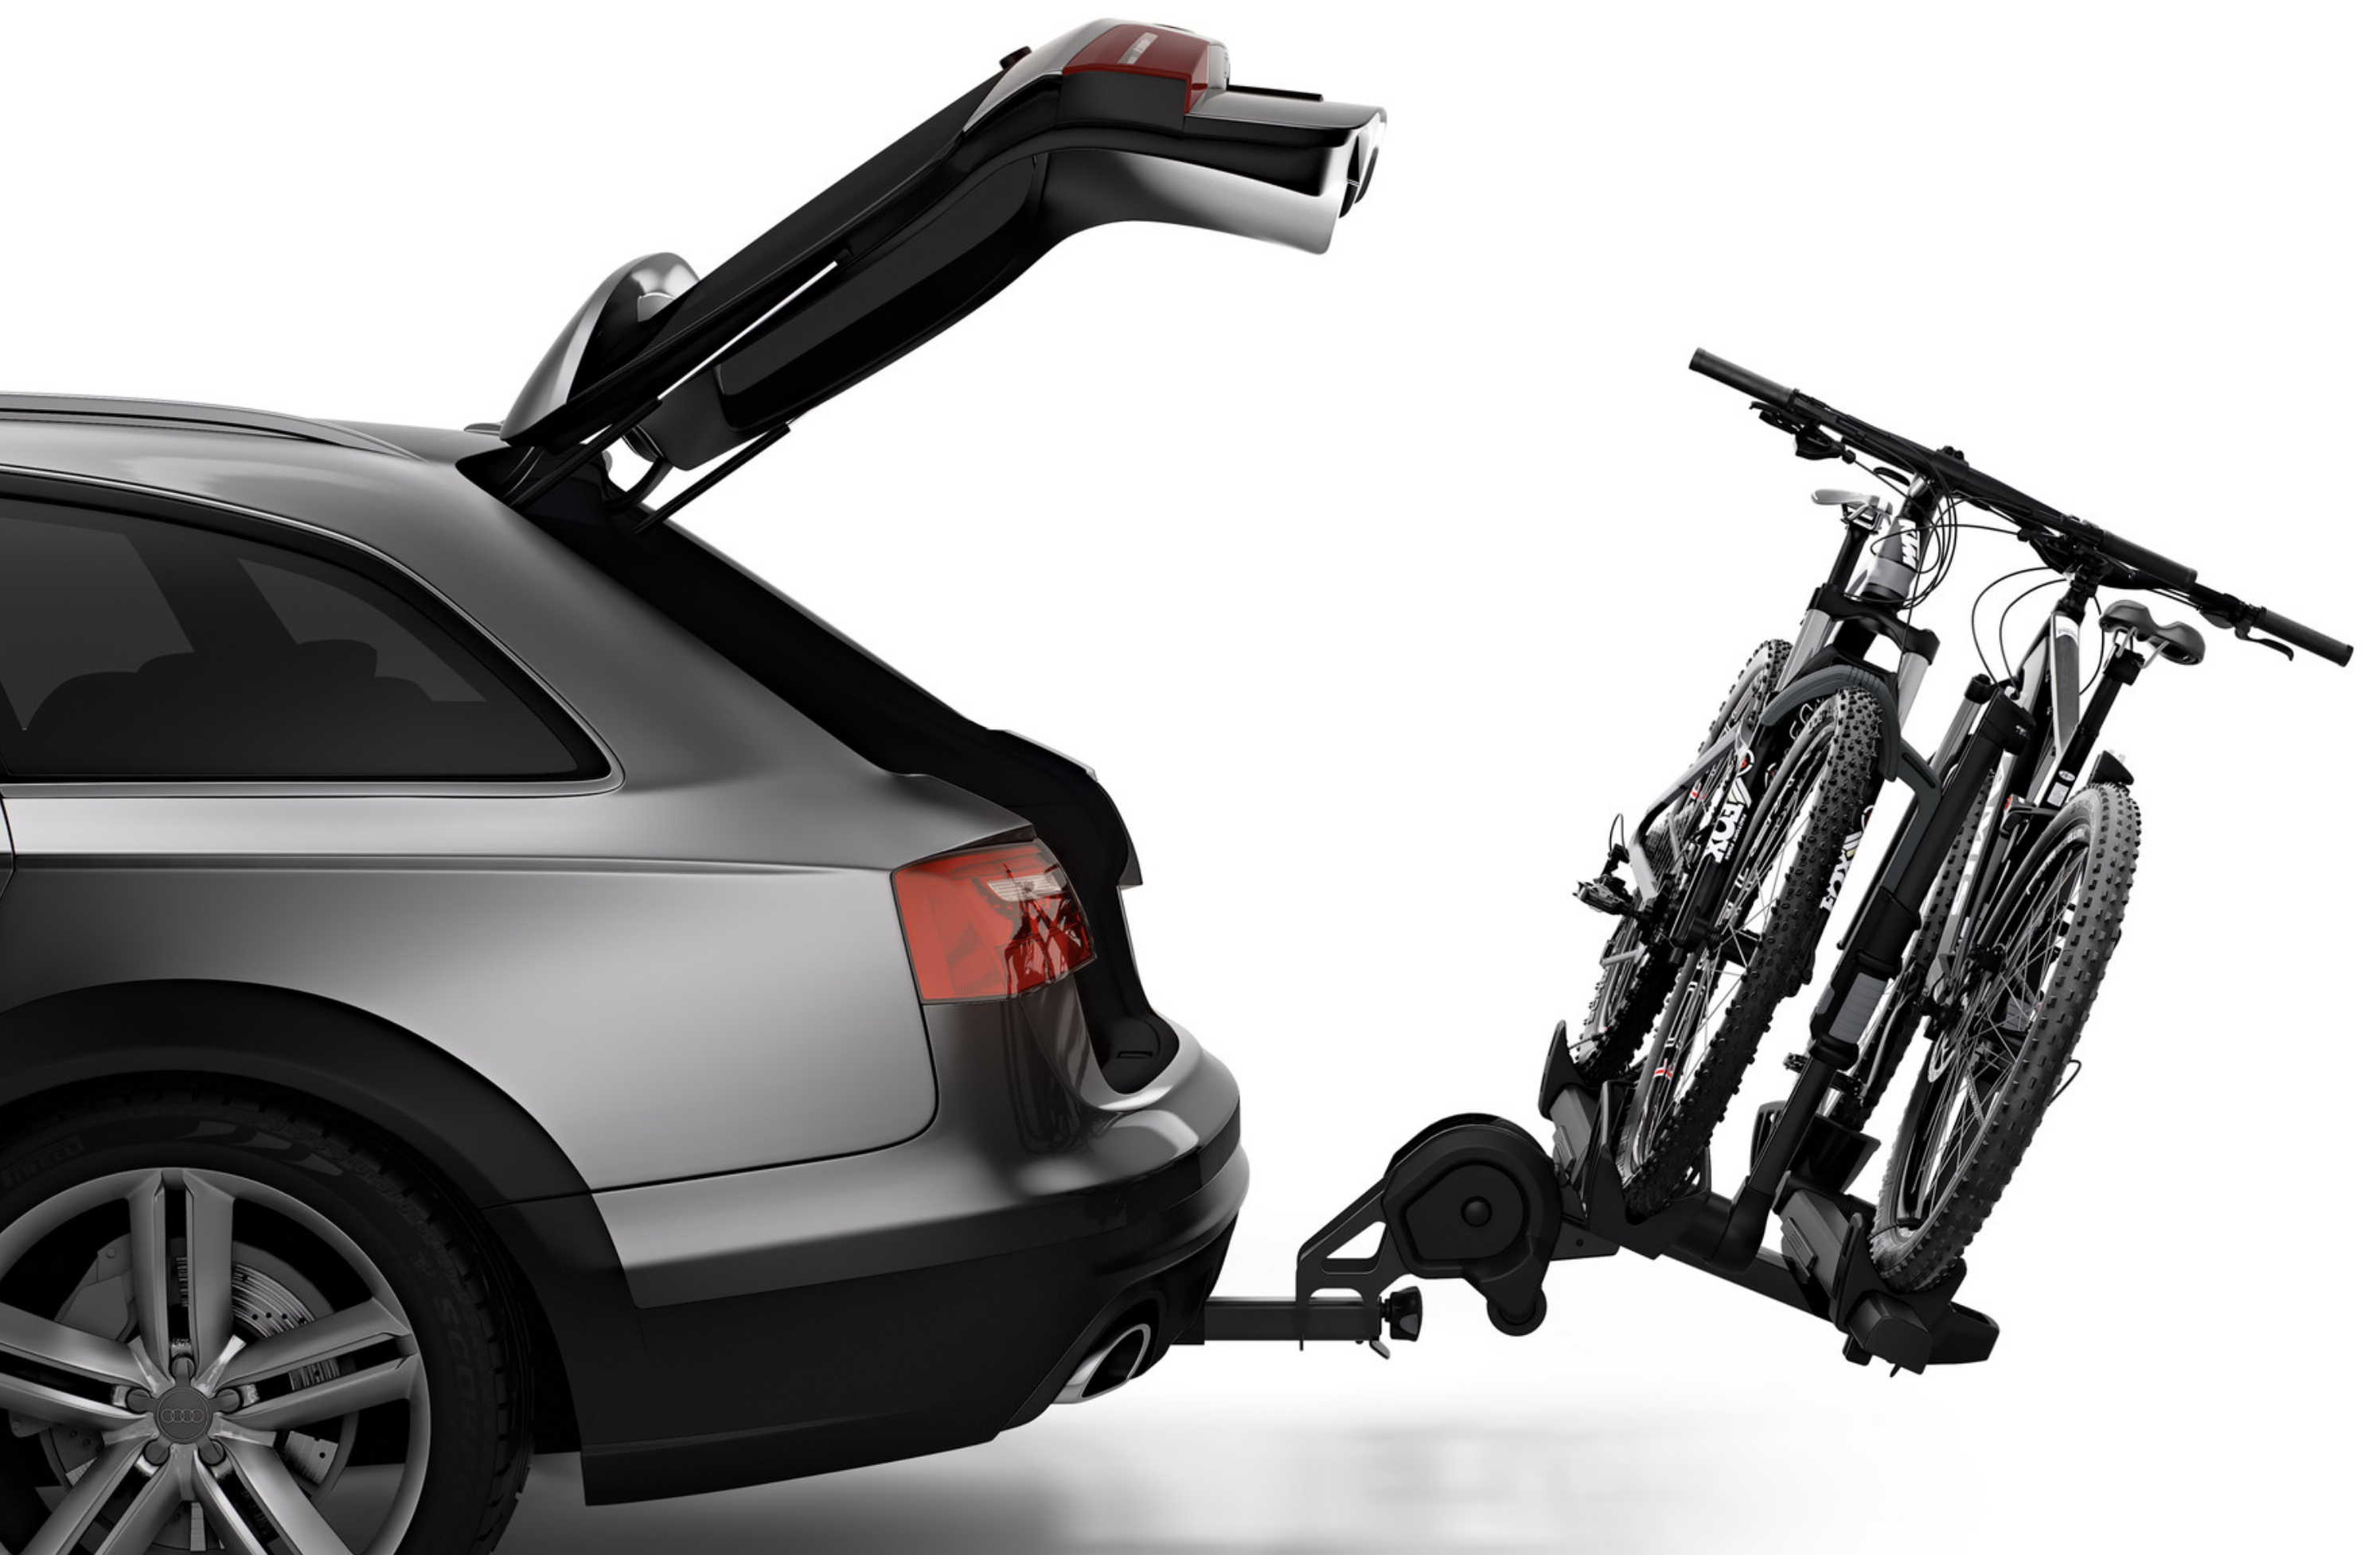 Thule T2 XTR Hitch Rack Expanded for trunck access